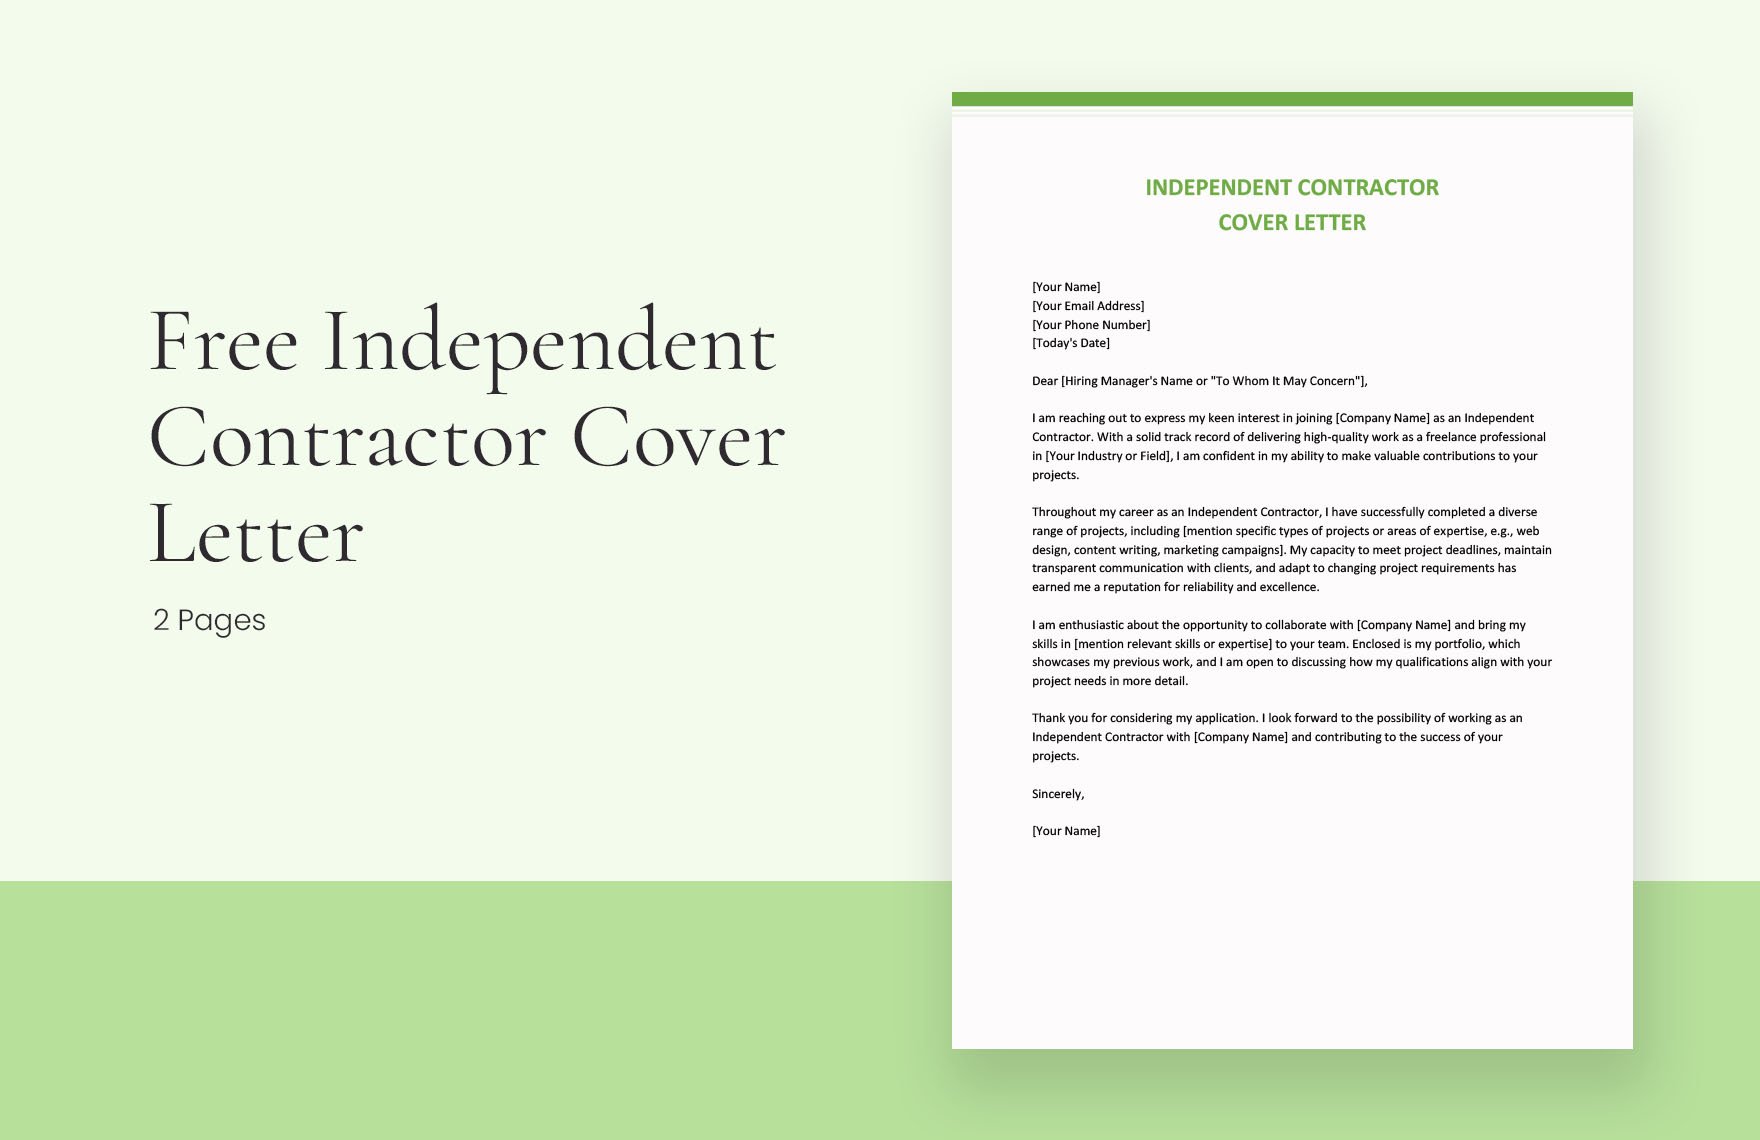 Independent Contractor Cover Letter